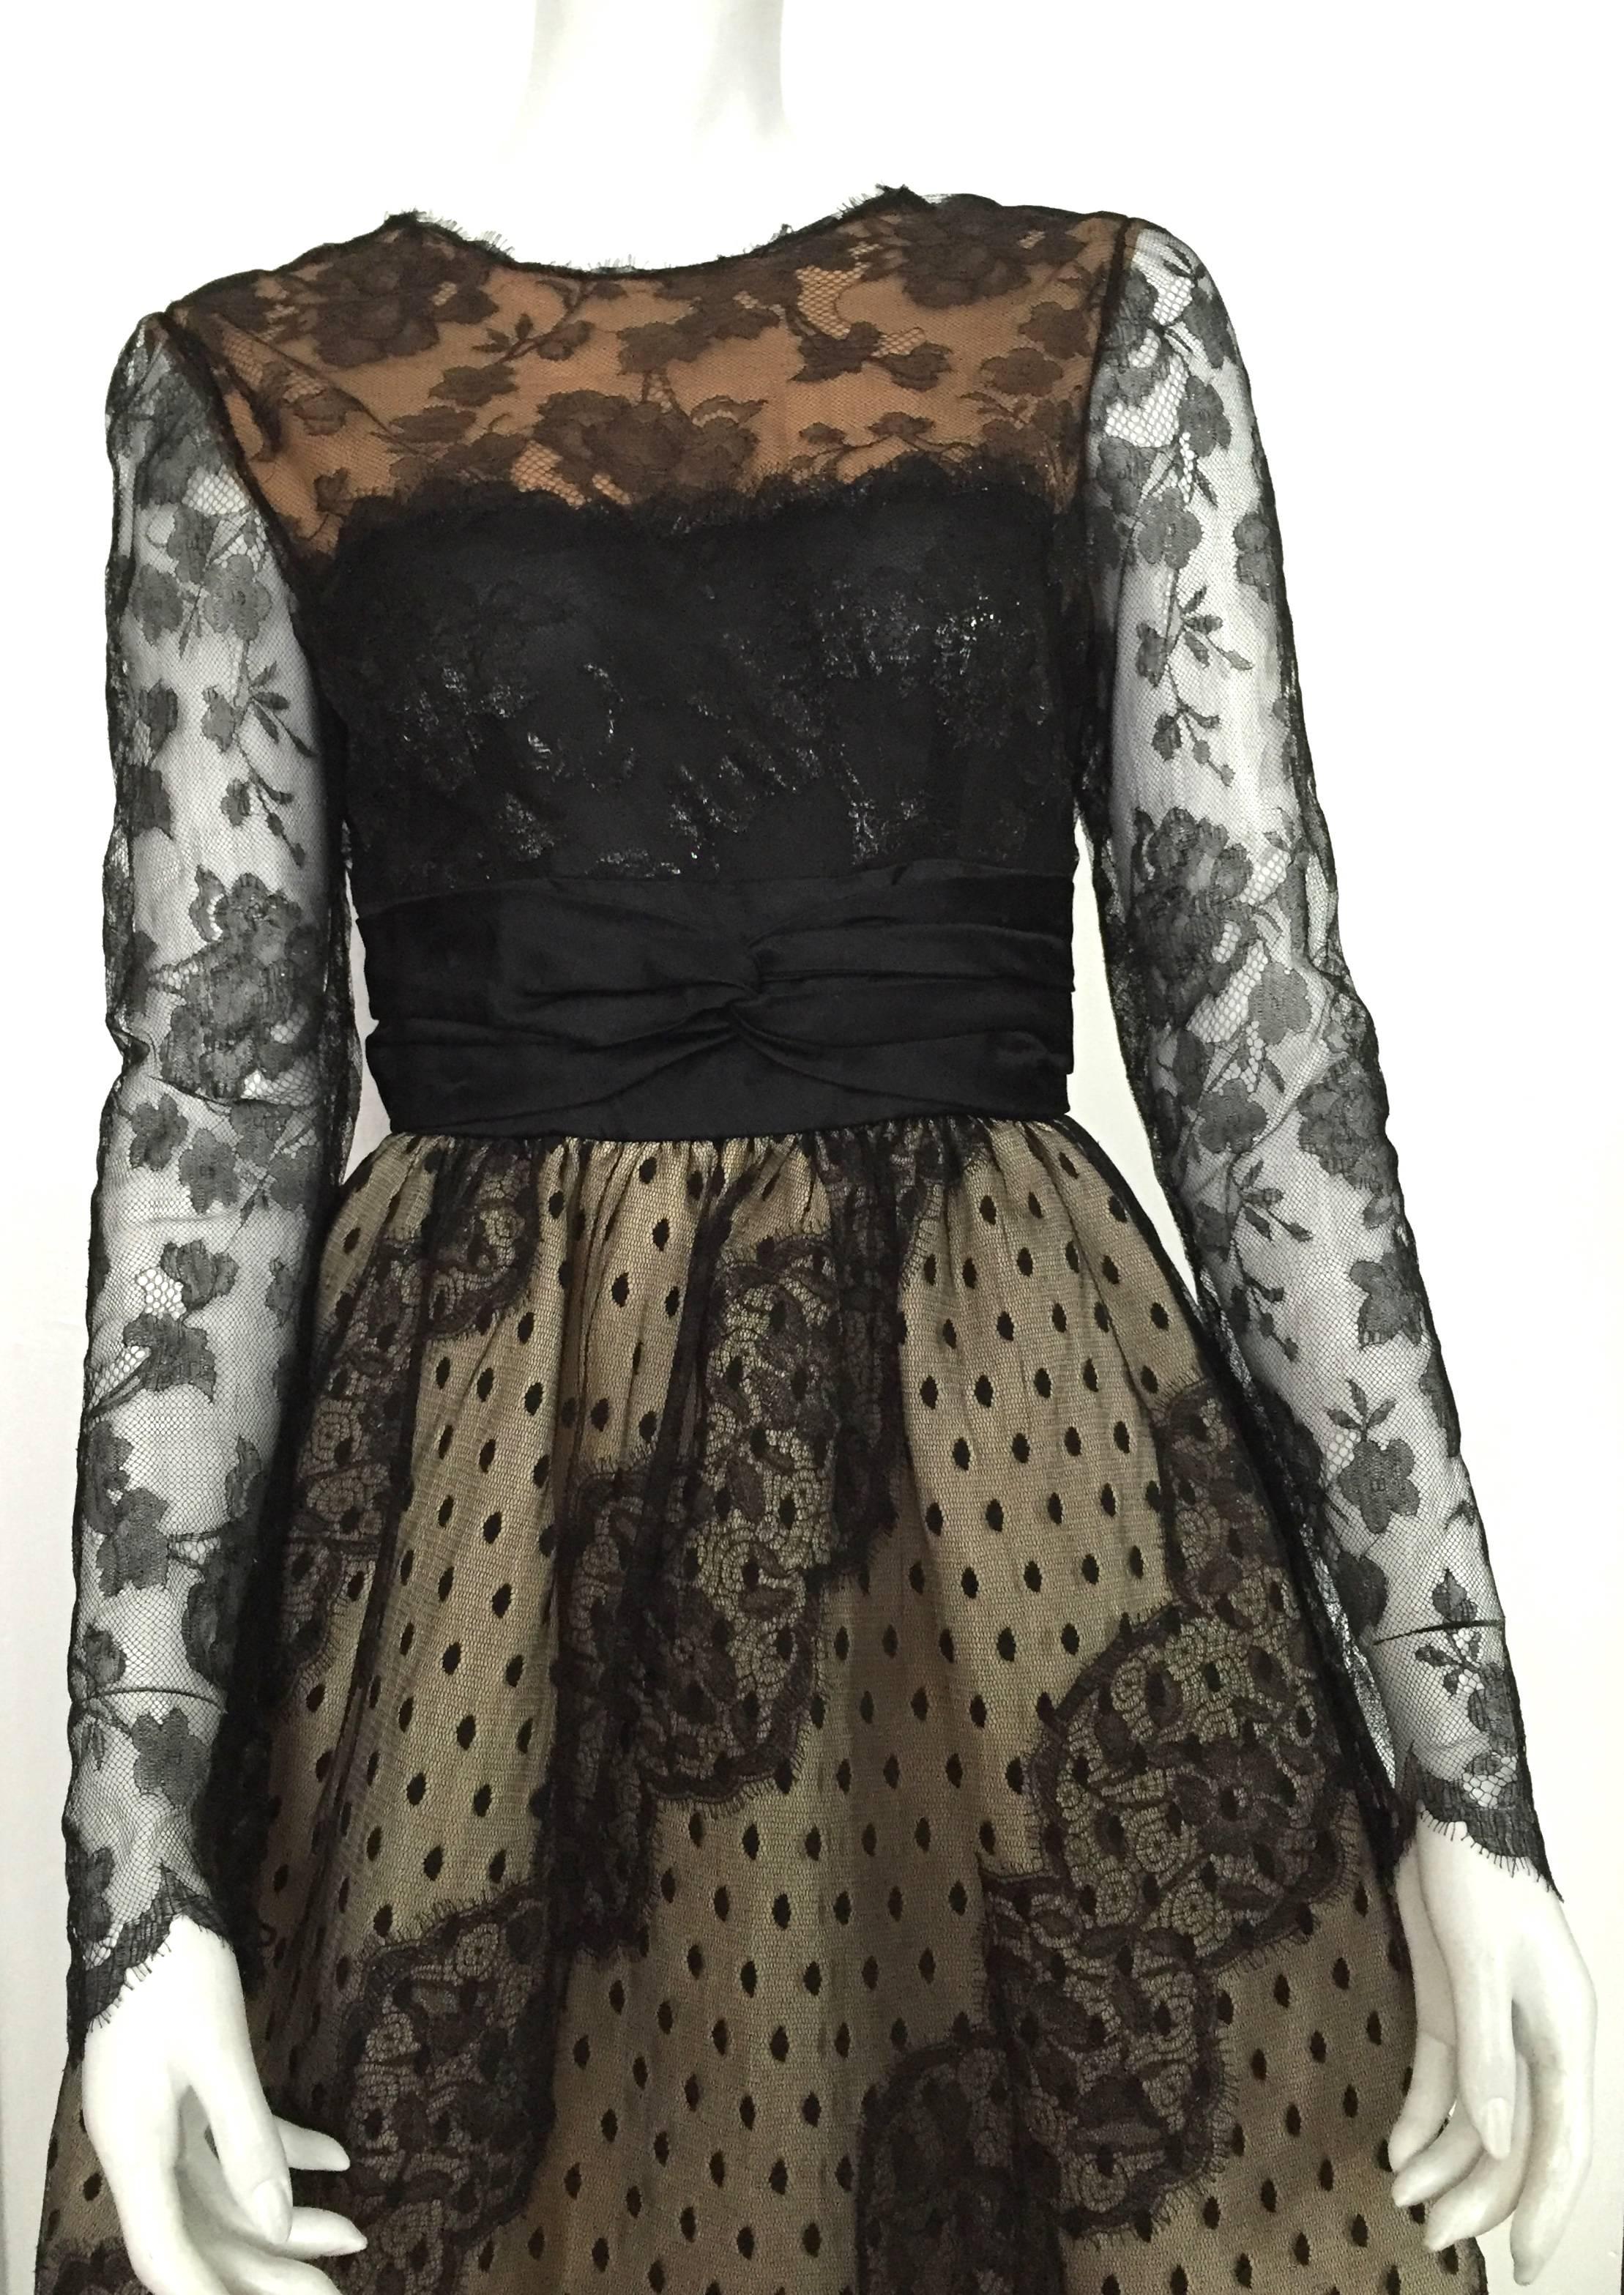 Bill Blass for Saks Fifth Avenue late 1970s black lace overlay & black swirls of lace appliqué on ivory silk taffeta skirt is a vintage size 6 but fits like a modern USA size 4. Please see & use measurements below to insure you can properly fit this